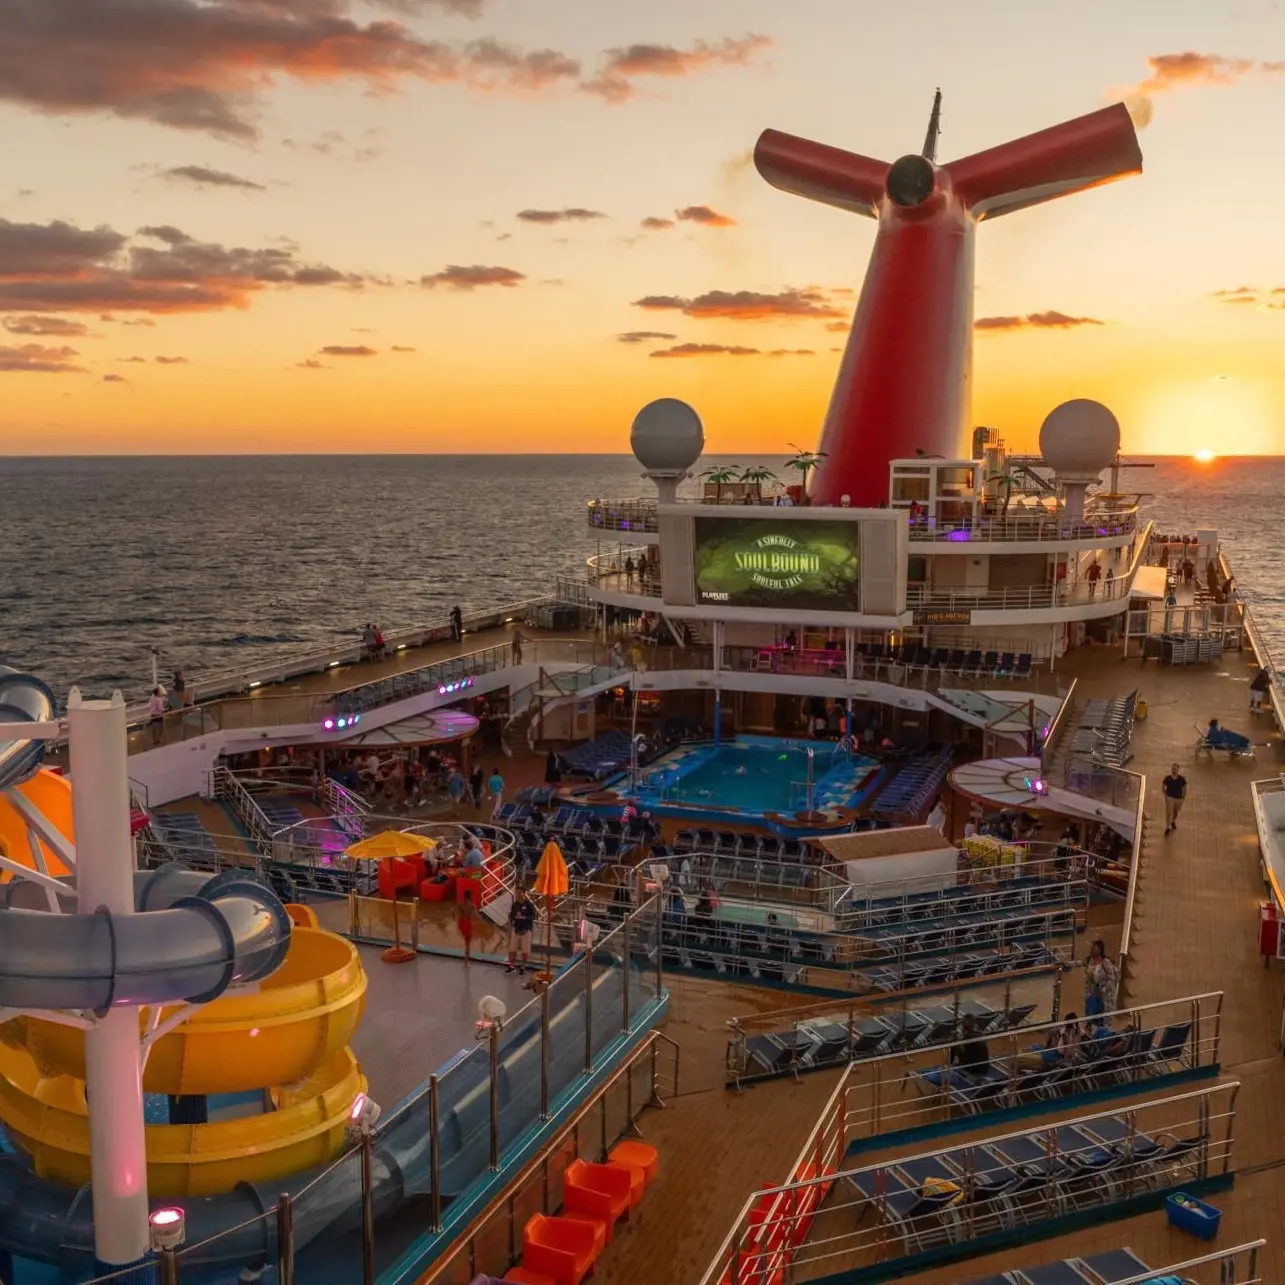 Carnival Conquest has Carnival Seaside Theater for dive in movies at sea